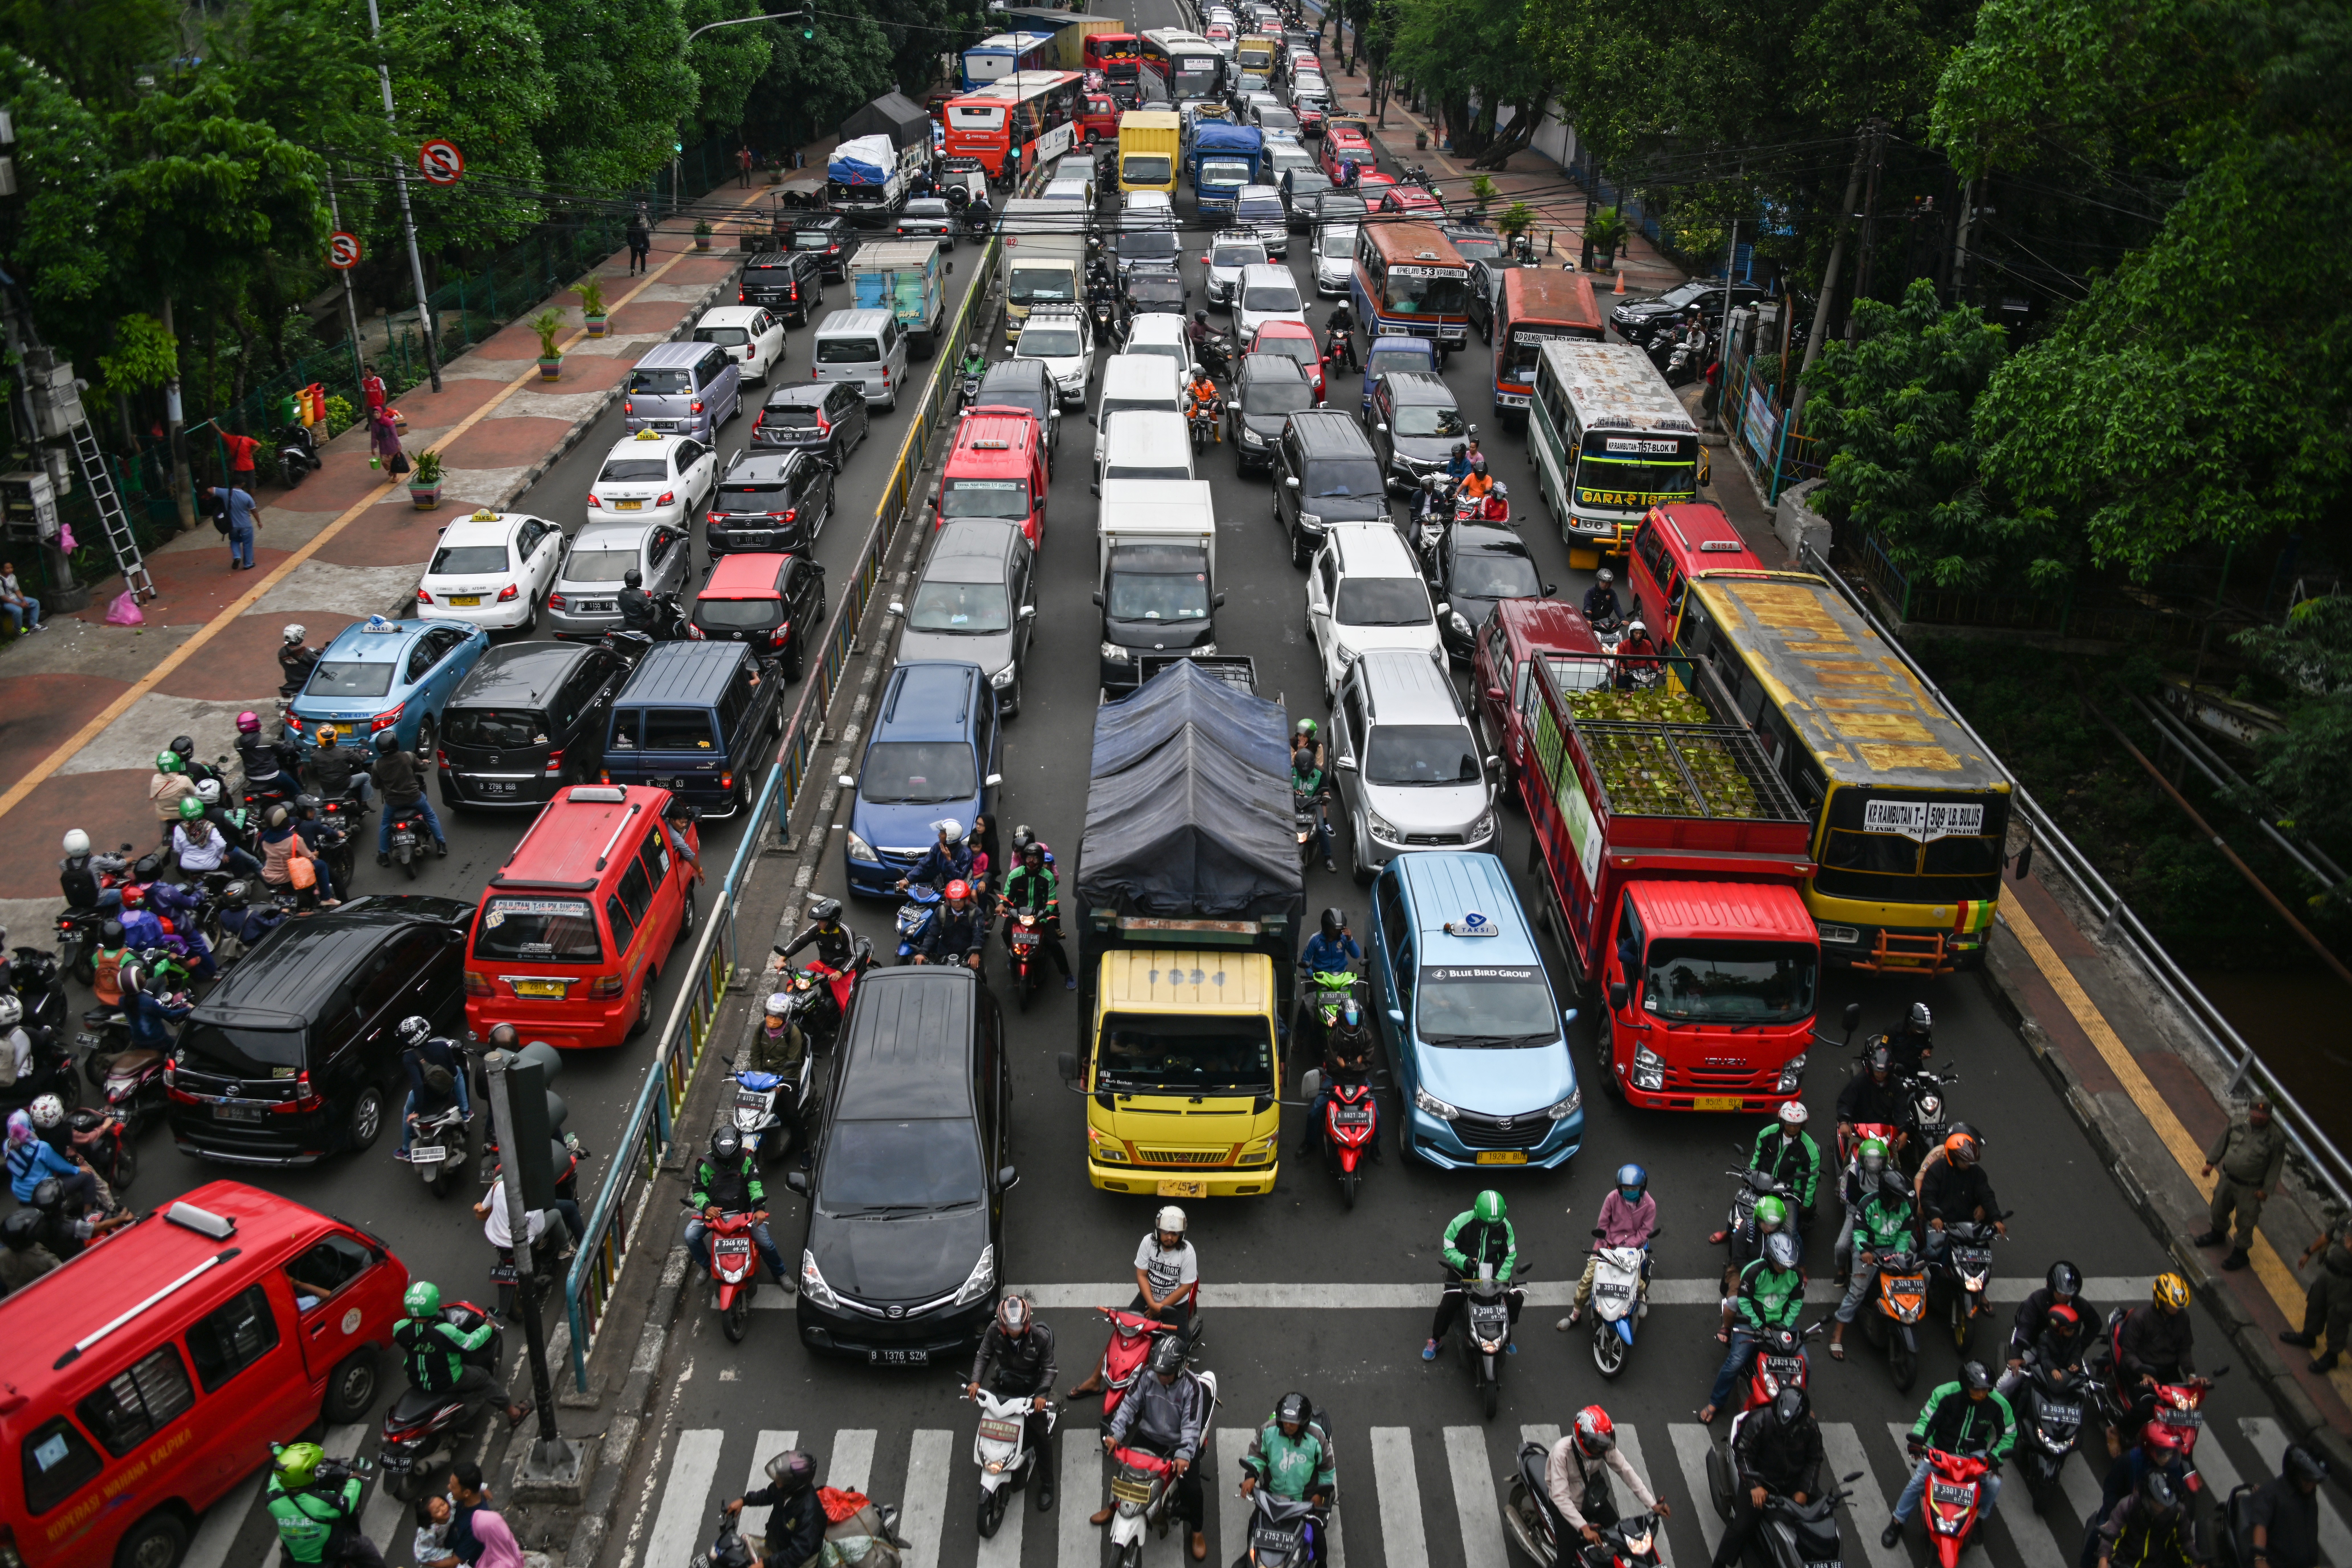 Motorists are seen during a traffic jam in Jakarta on March 6, 2019. (Photo by BAY ISMOYO / AFP)